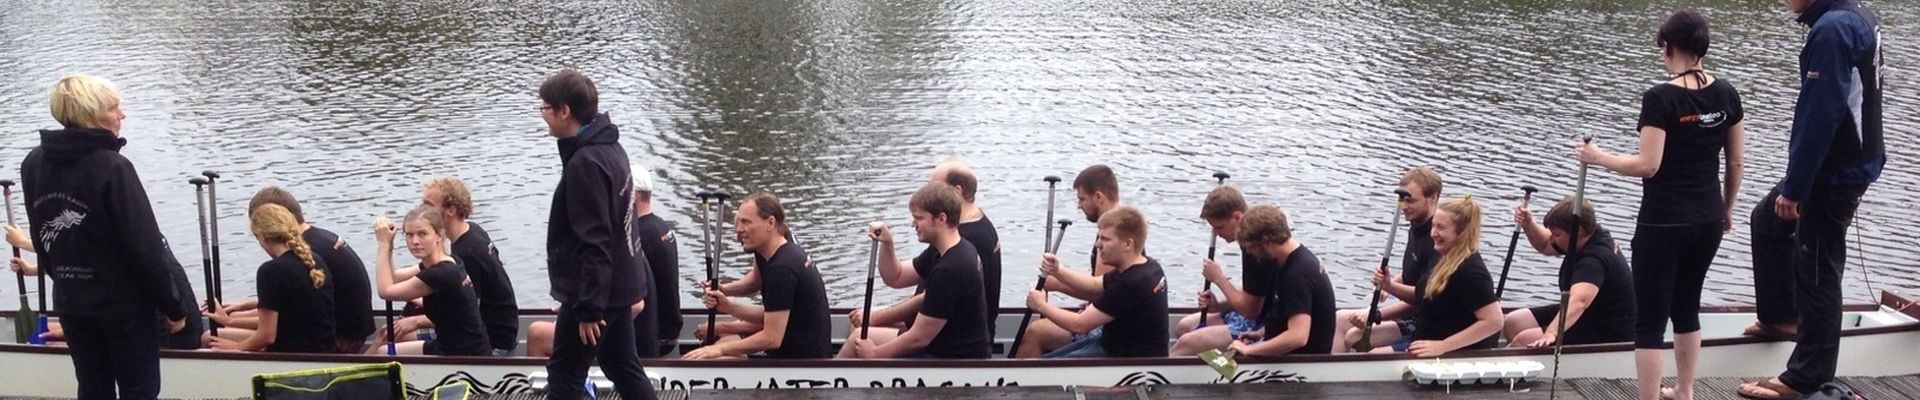 emsys team in the boat